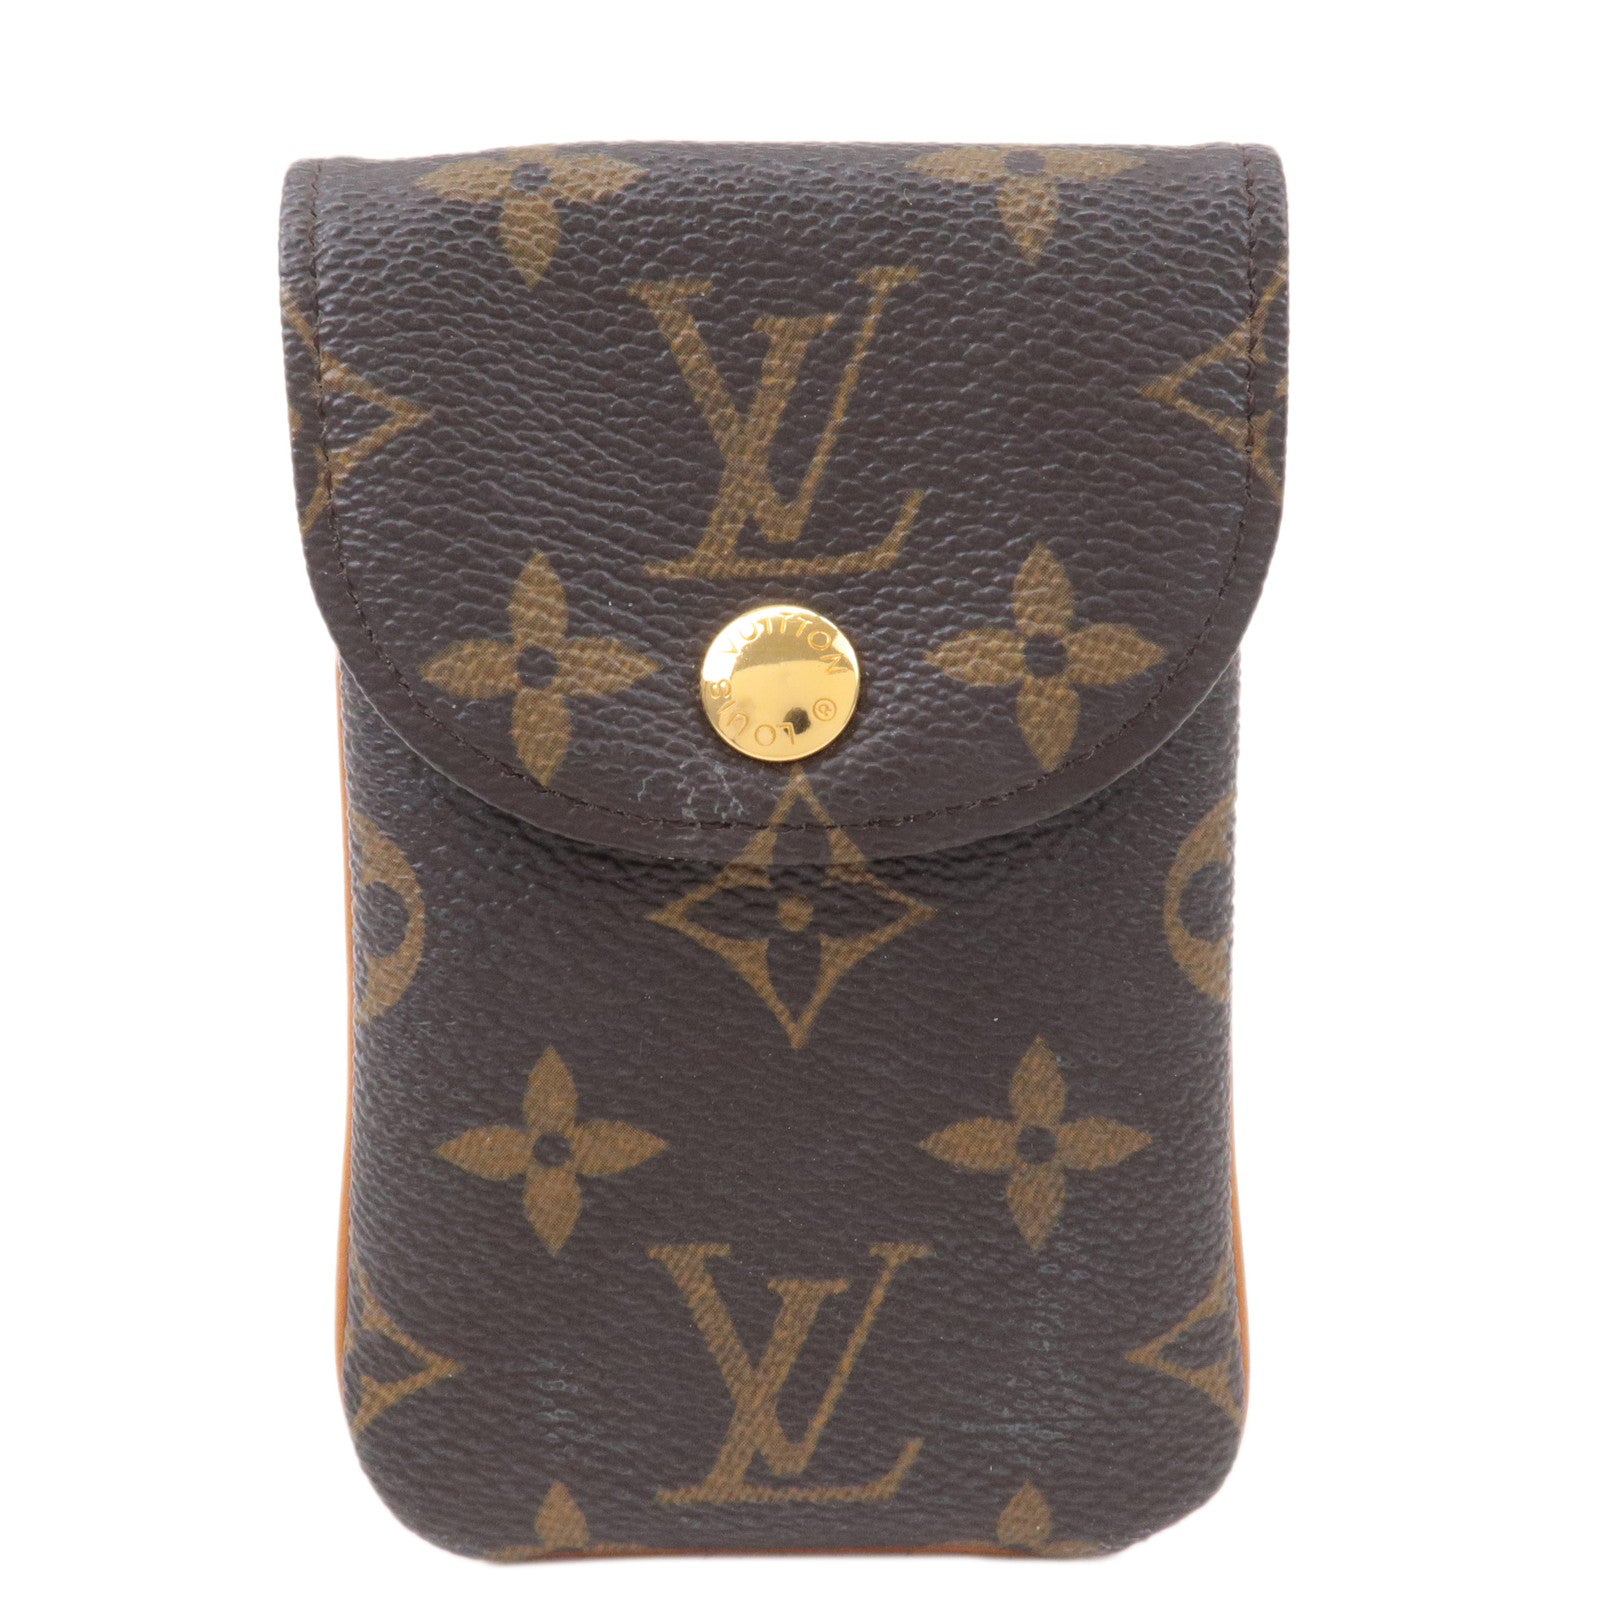 LOUIS VUITTON Monogram Etui Telephone MM M66546 Cell Phone Pouch Brown Very  Good